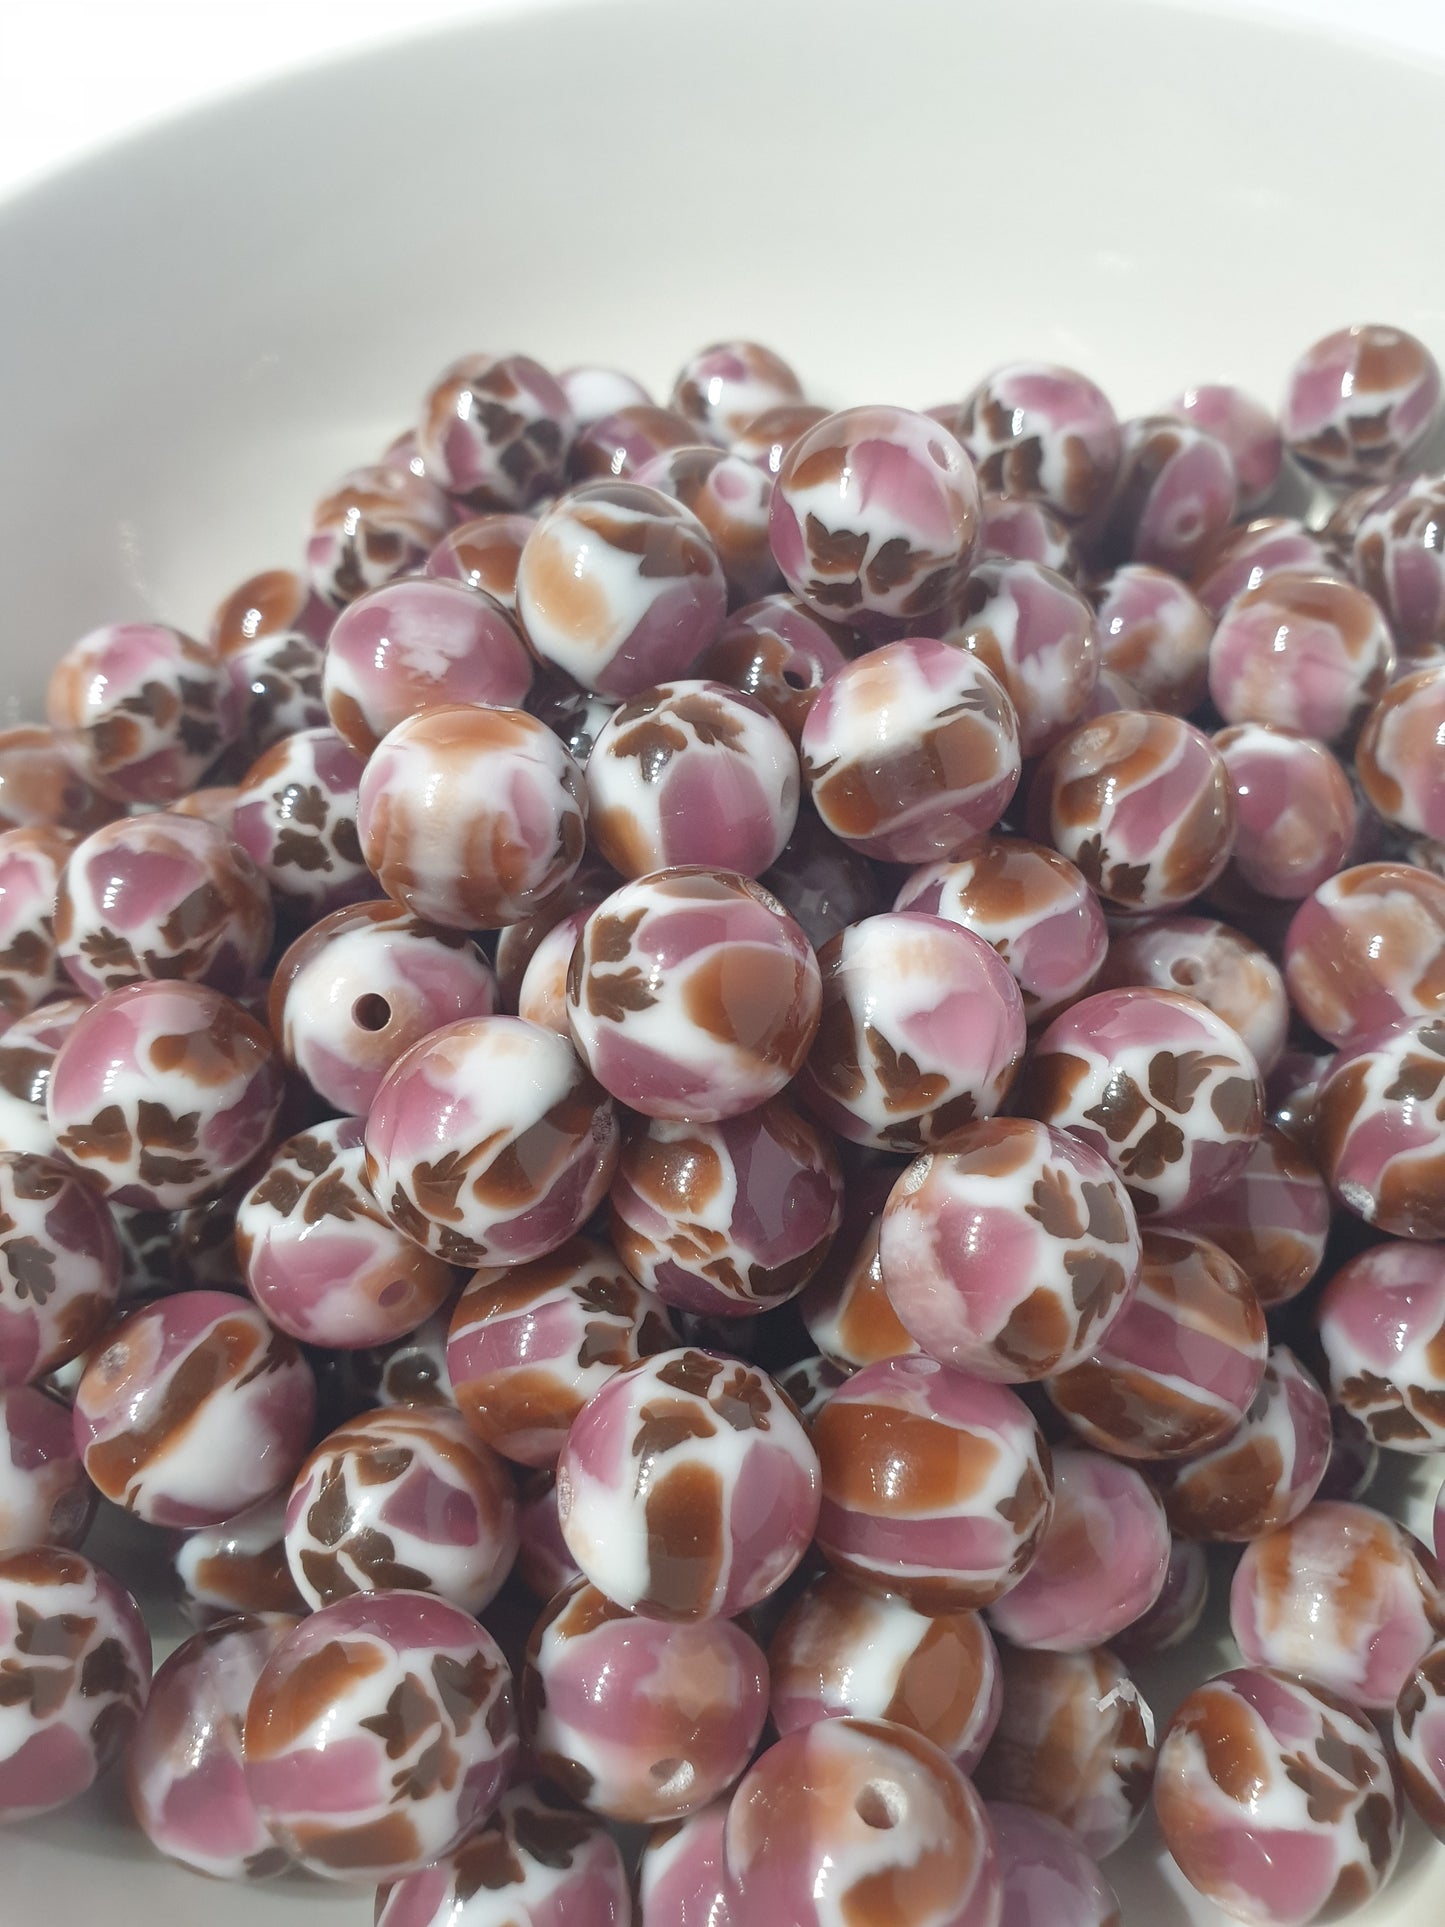 Round Brown with Pink Jelly Chunk beads. 16mm. Unusual and beautiful for jewellery and beadable blanks.